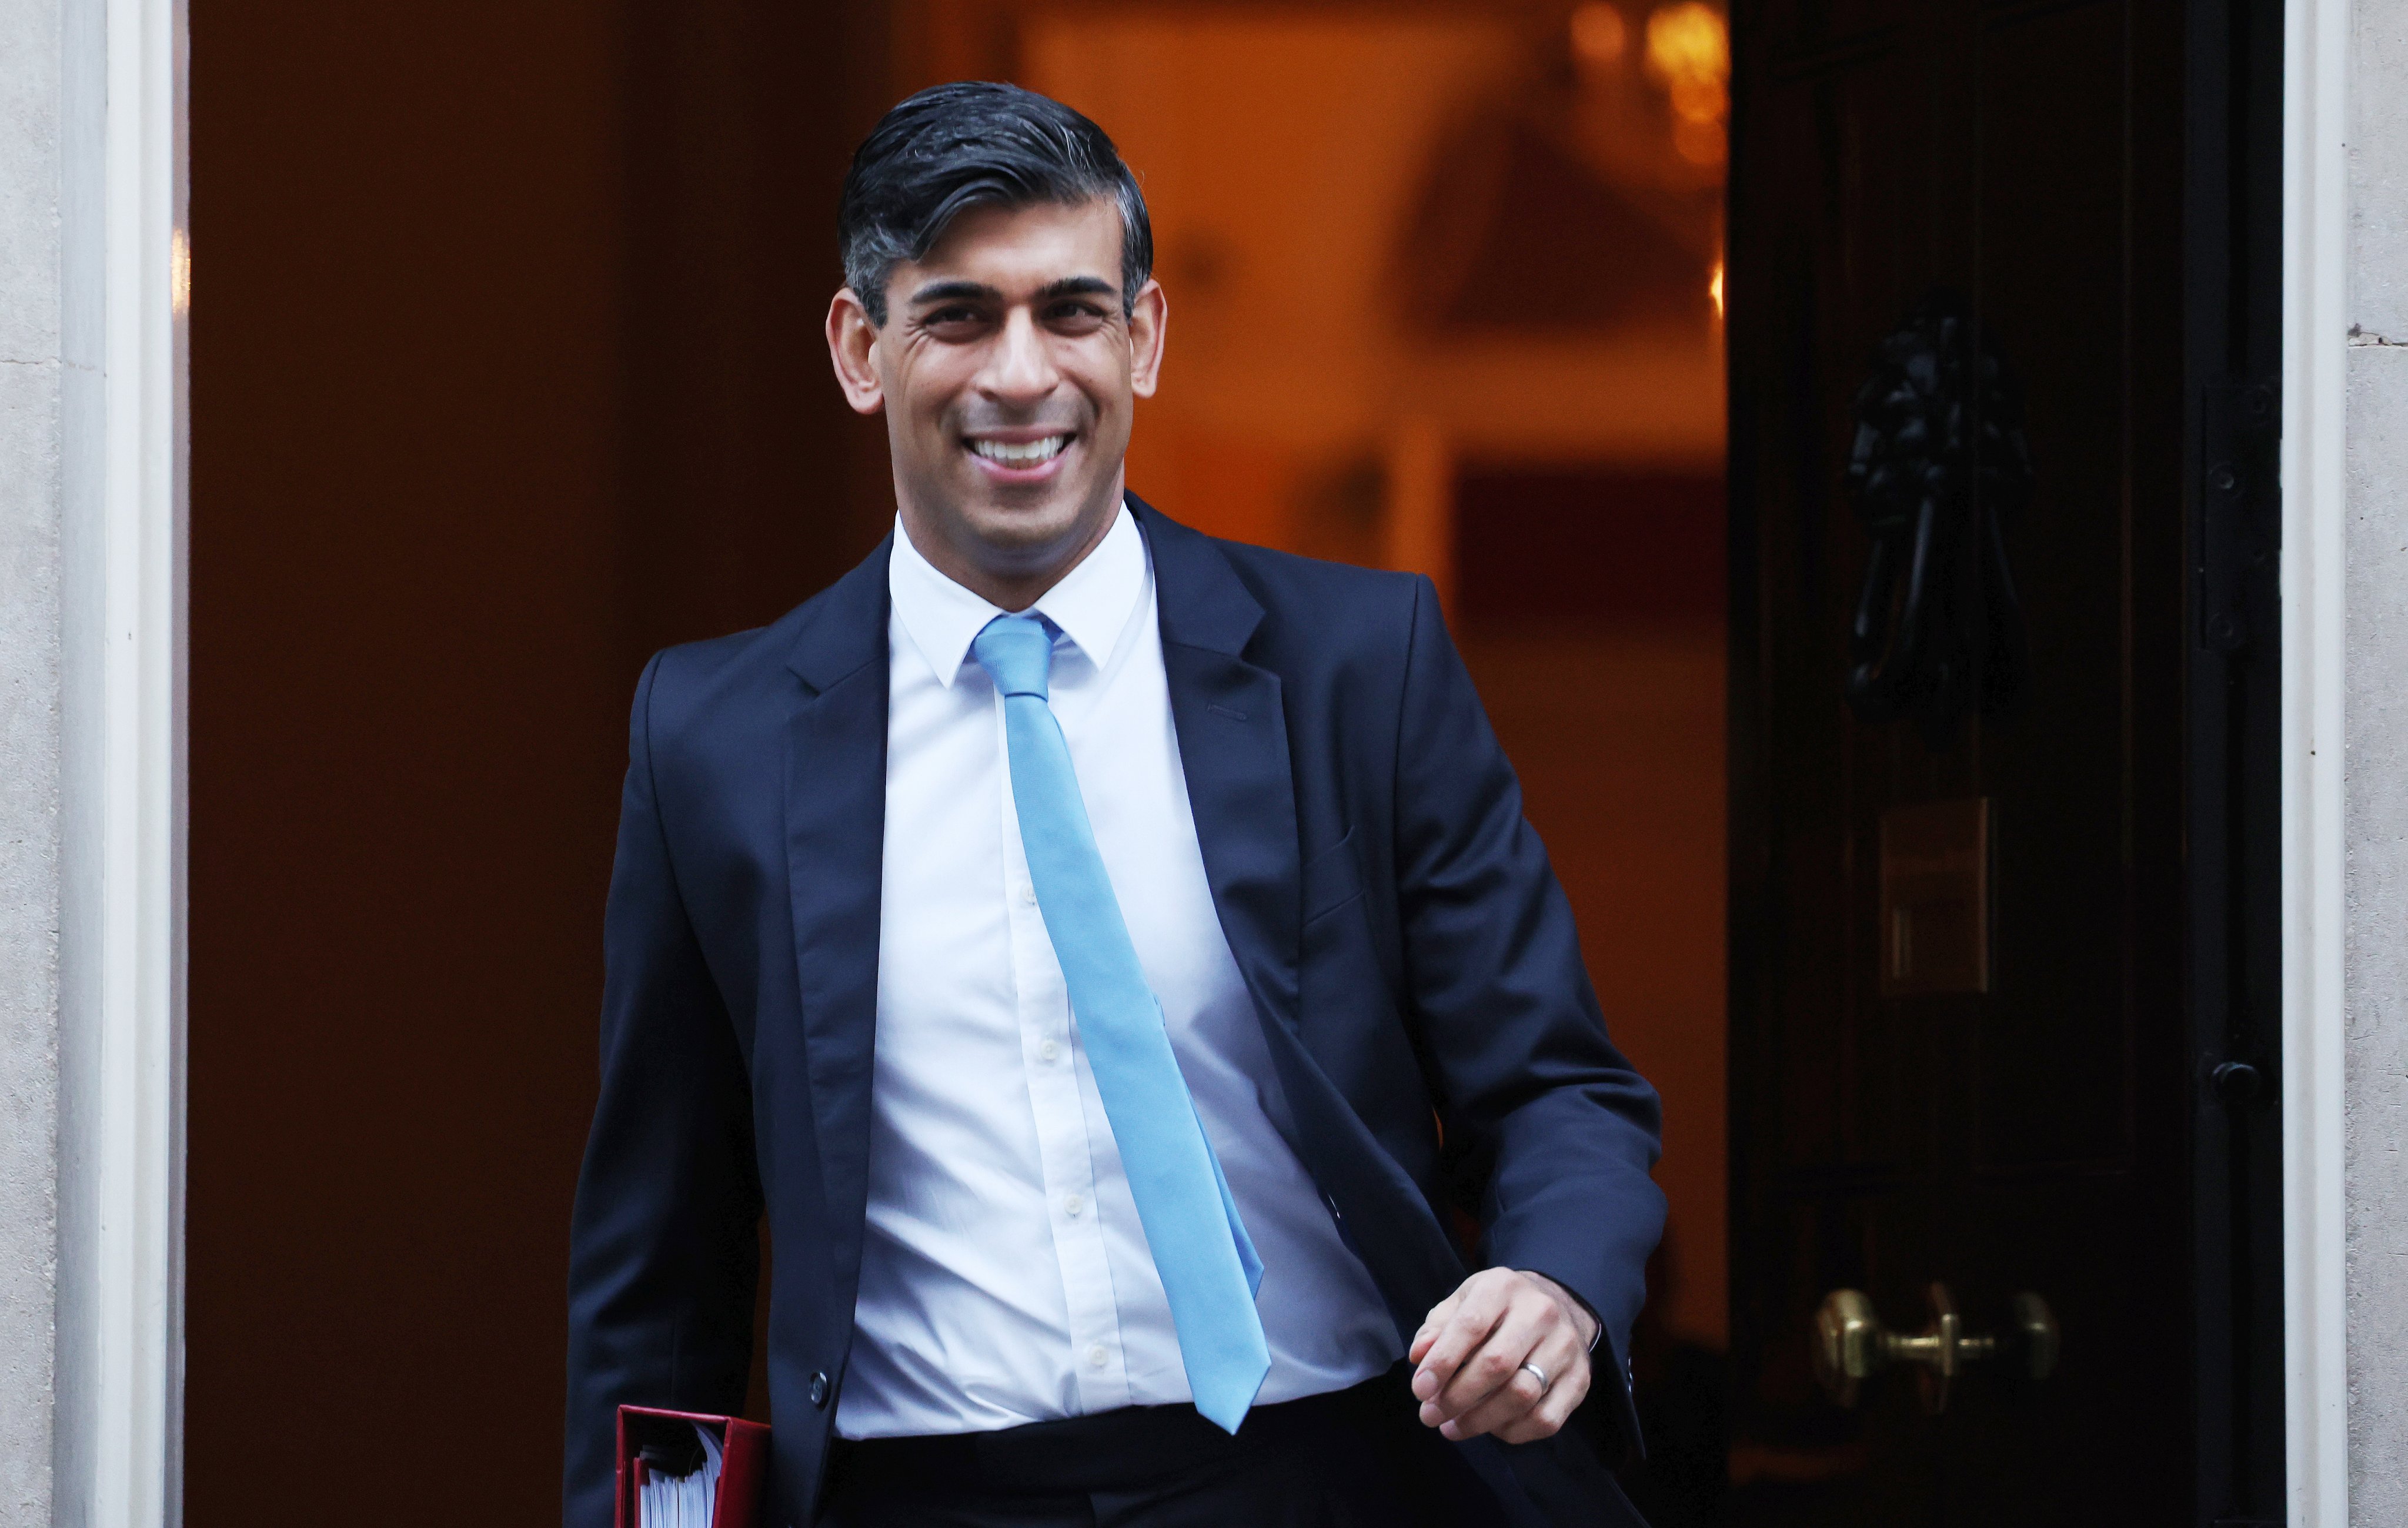 British Prime Minister Rishi Sunak follows the 36-hour monk fast that practitioners claim improves digestion, mental clarity and sleep quality, as well as helping with weight loss and food cravings. Photo: EPA-EFE